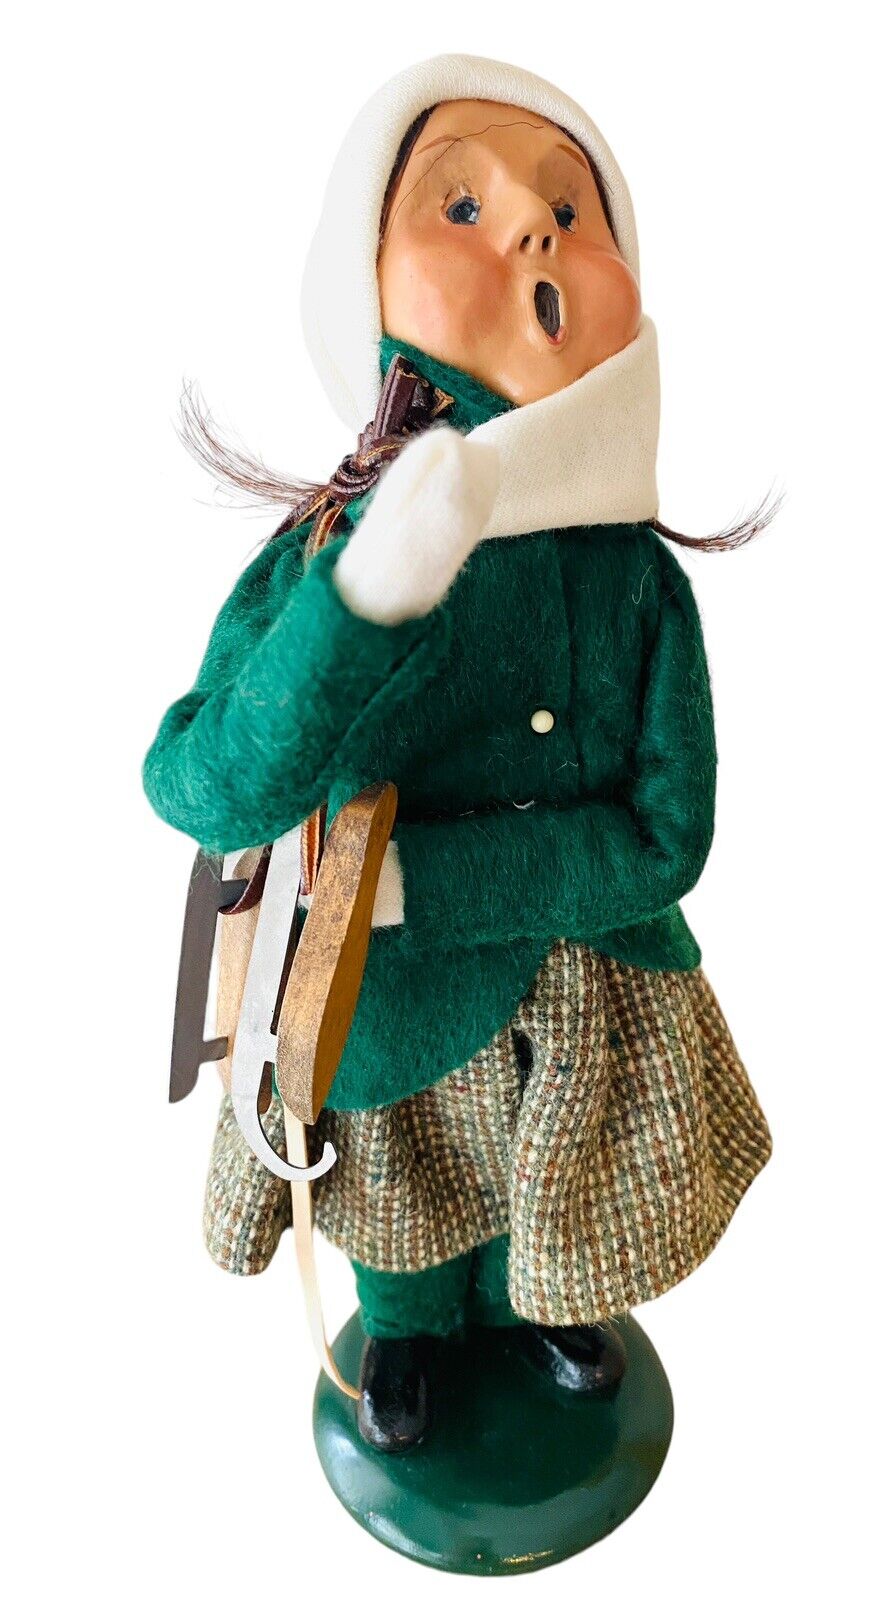 Byers Choice Carolers Skater Girl 1988 Green Outfit